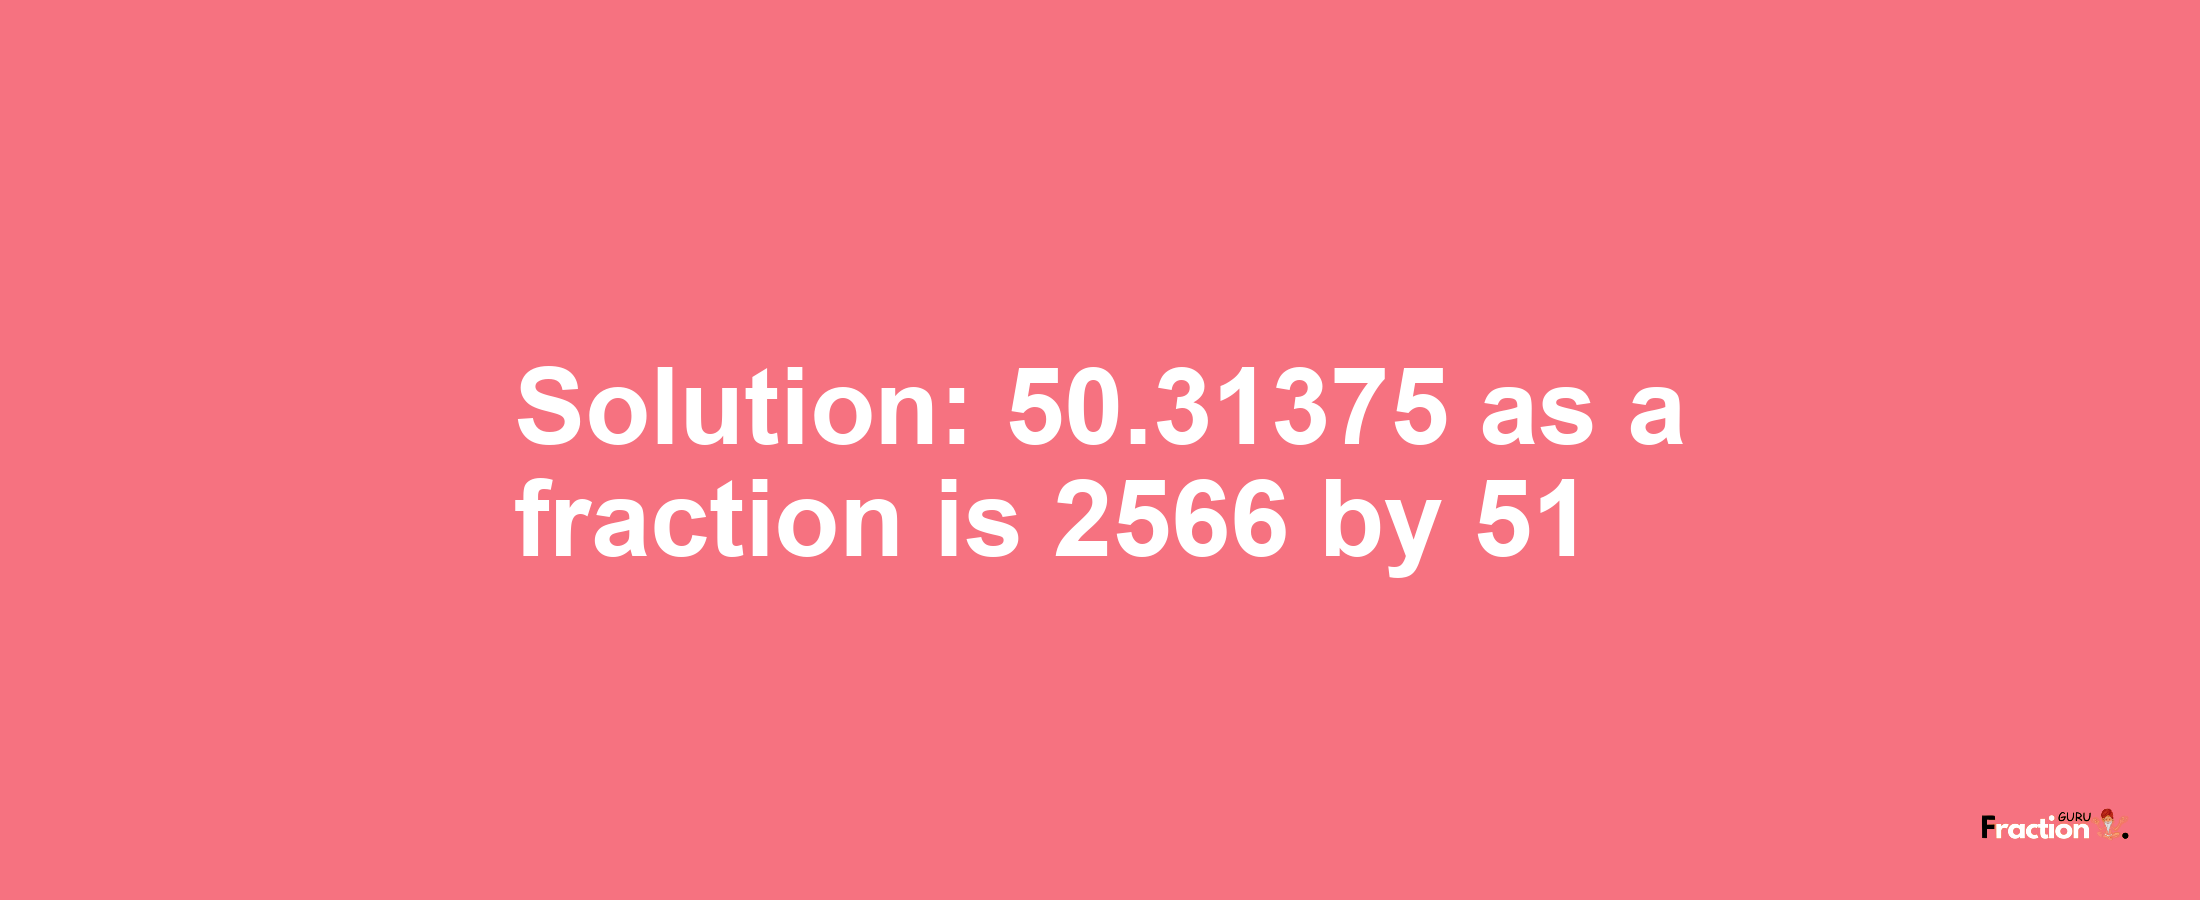 Solution:50.31375 as a fraction is 2566/51